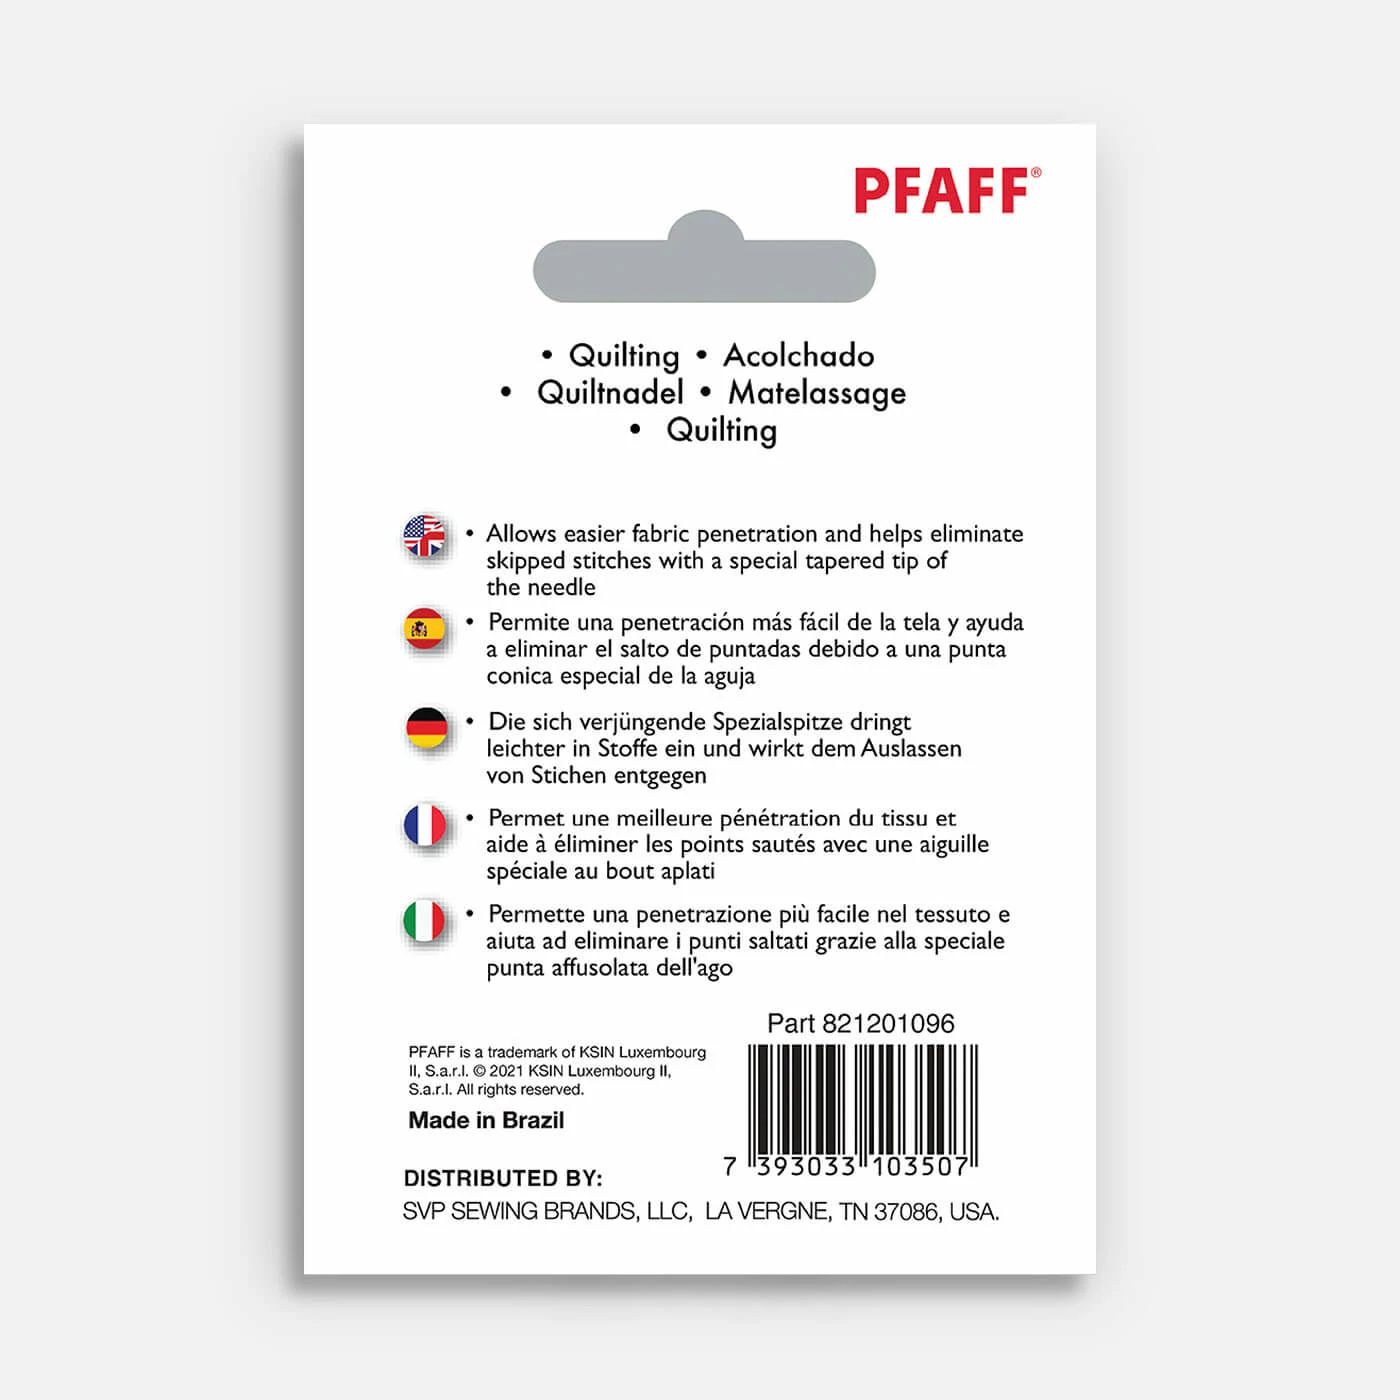 Pfaff Embroidery Titanium Sewing Machine Needles for heavy embroidery